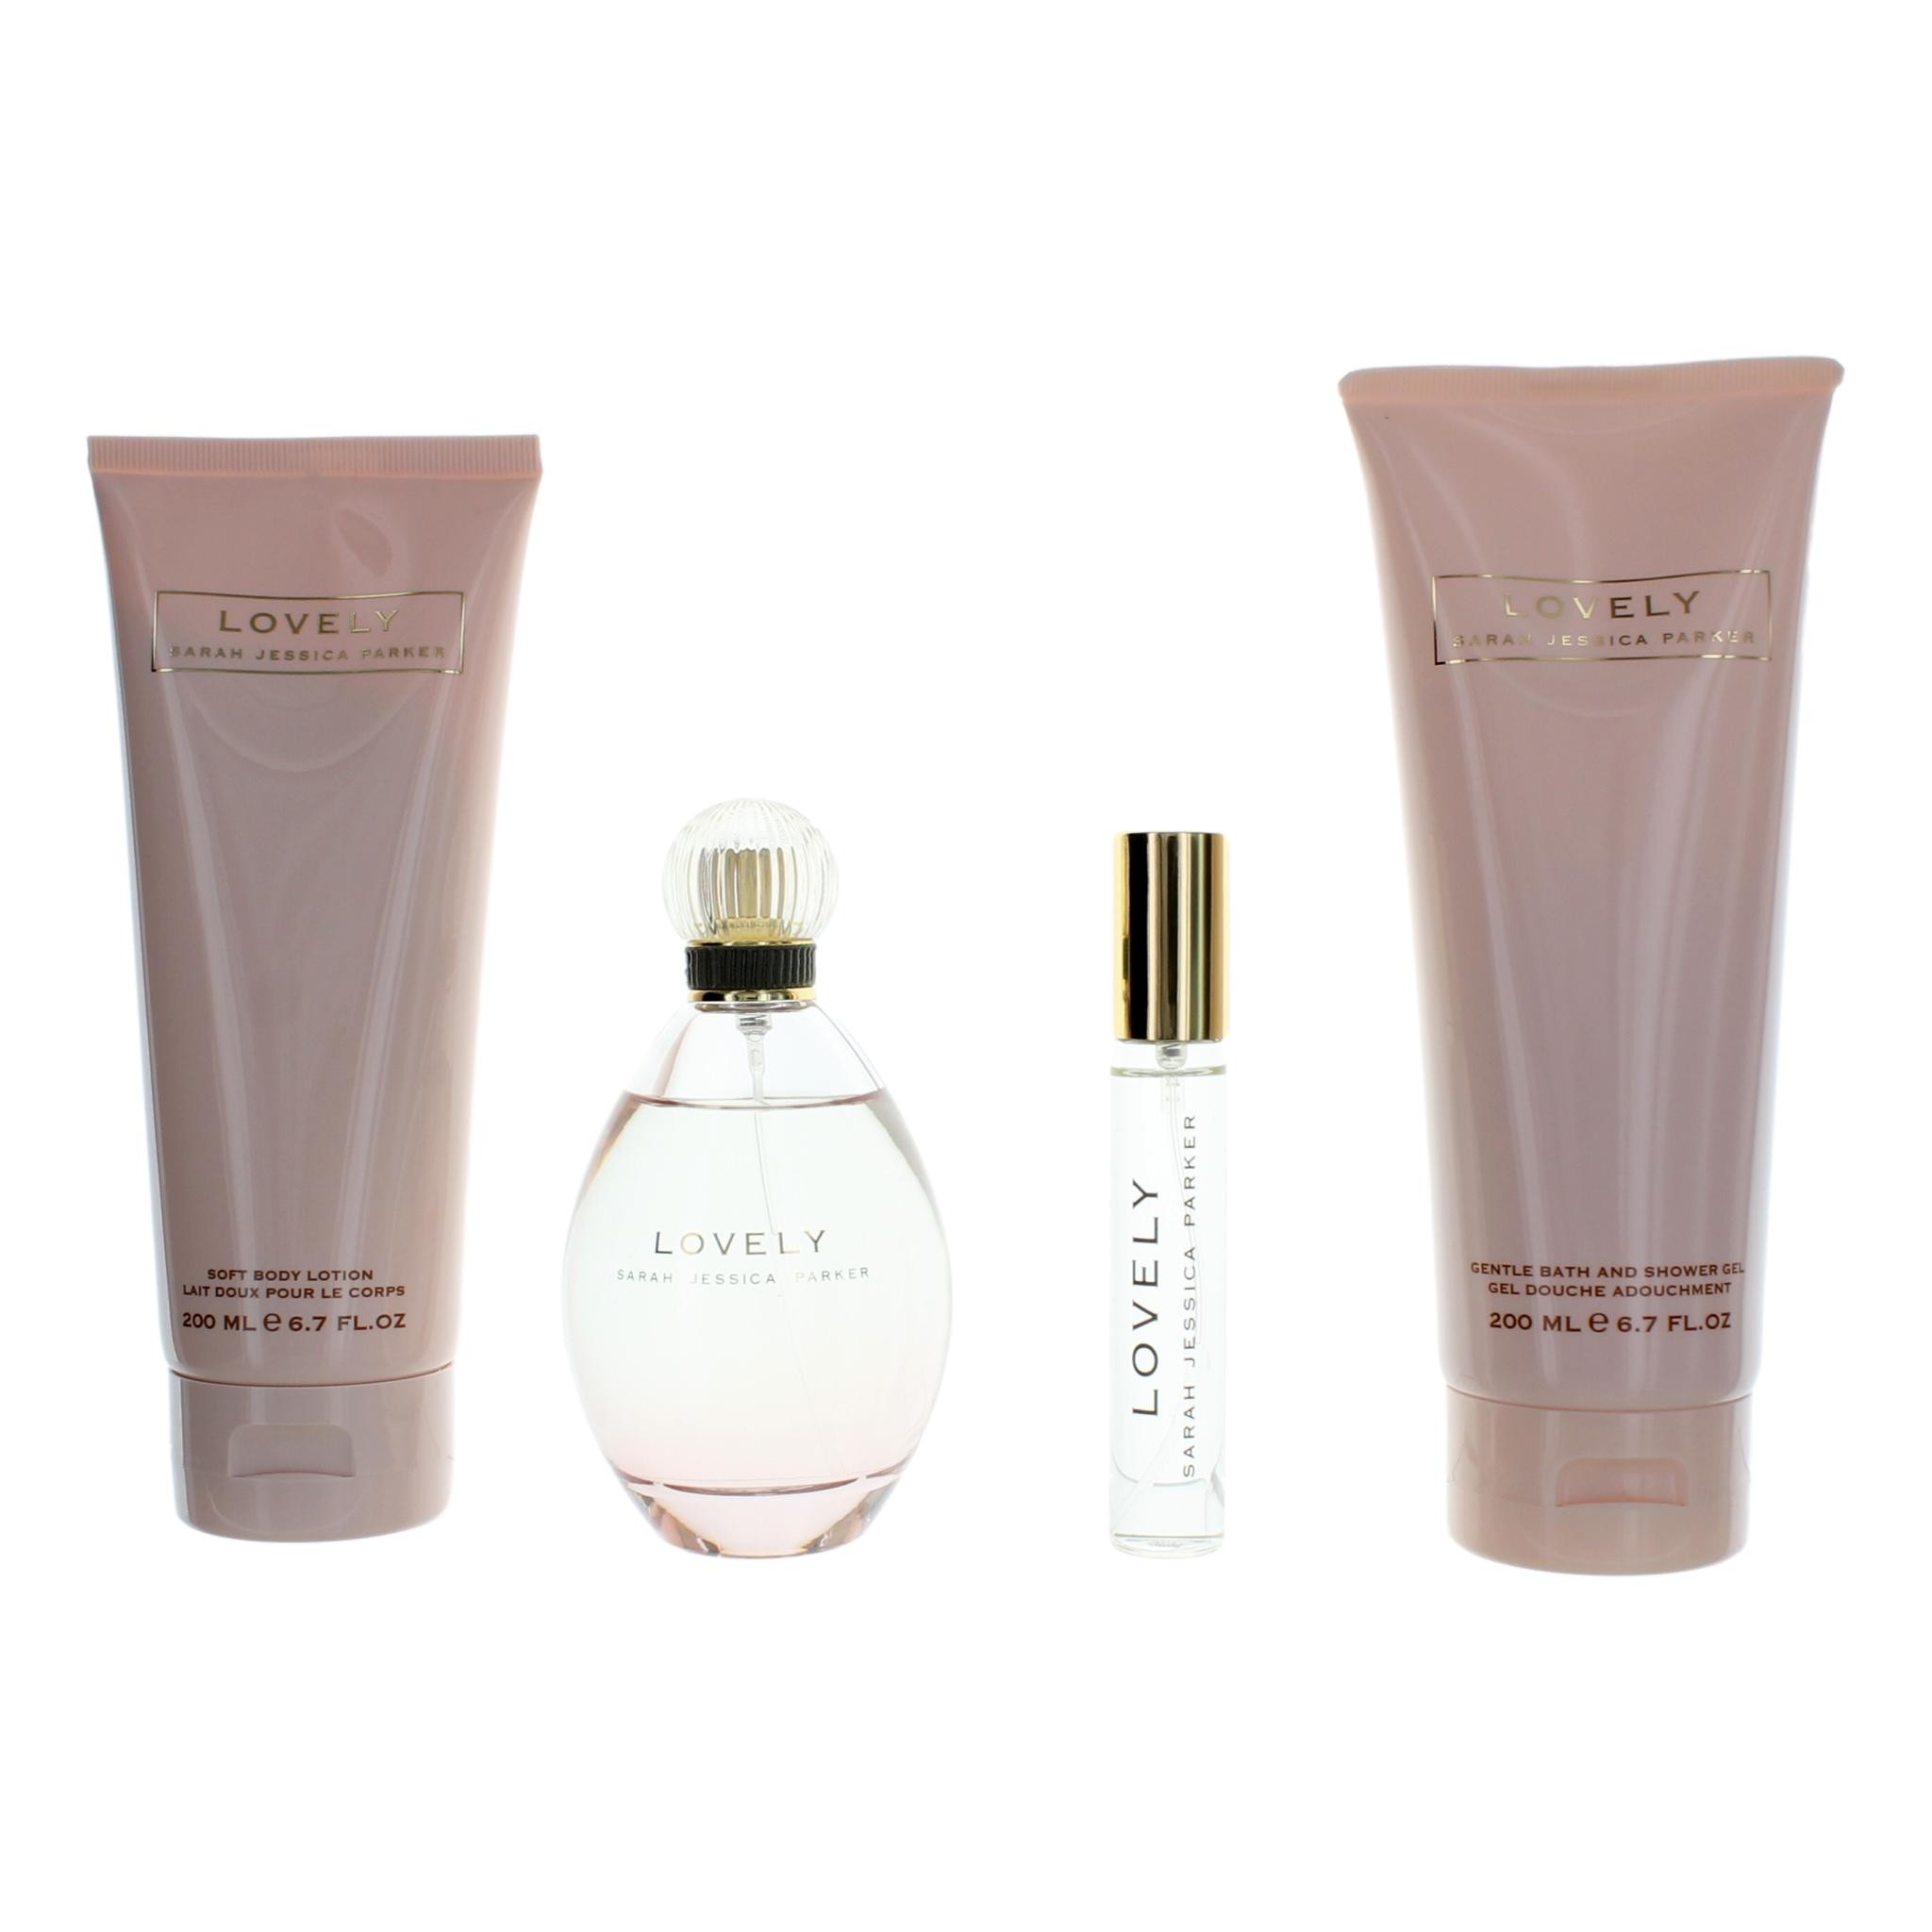 Lovely by Sarah Jessica Parker 4 Piece Gift Set for Women